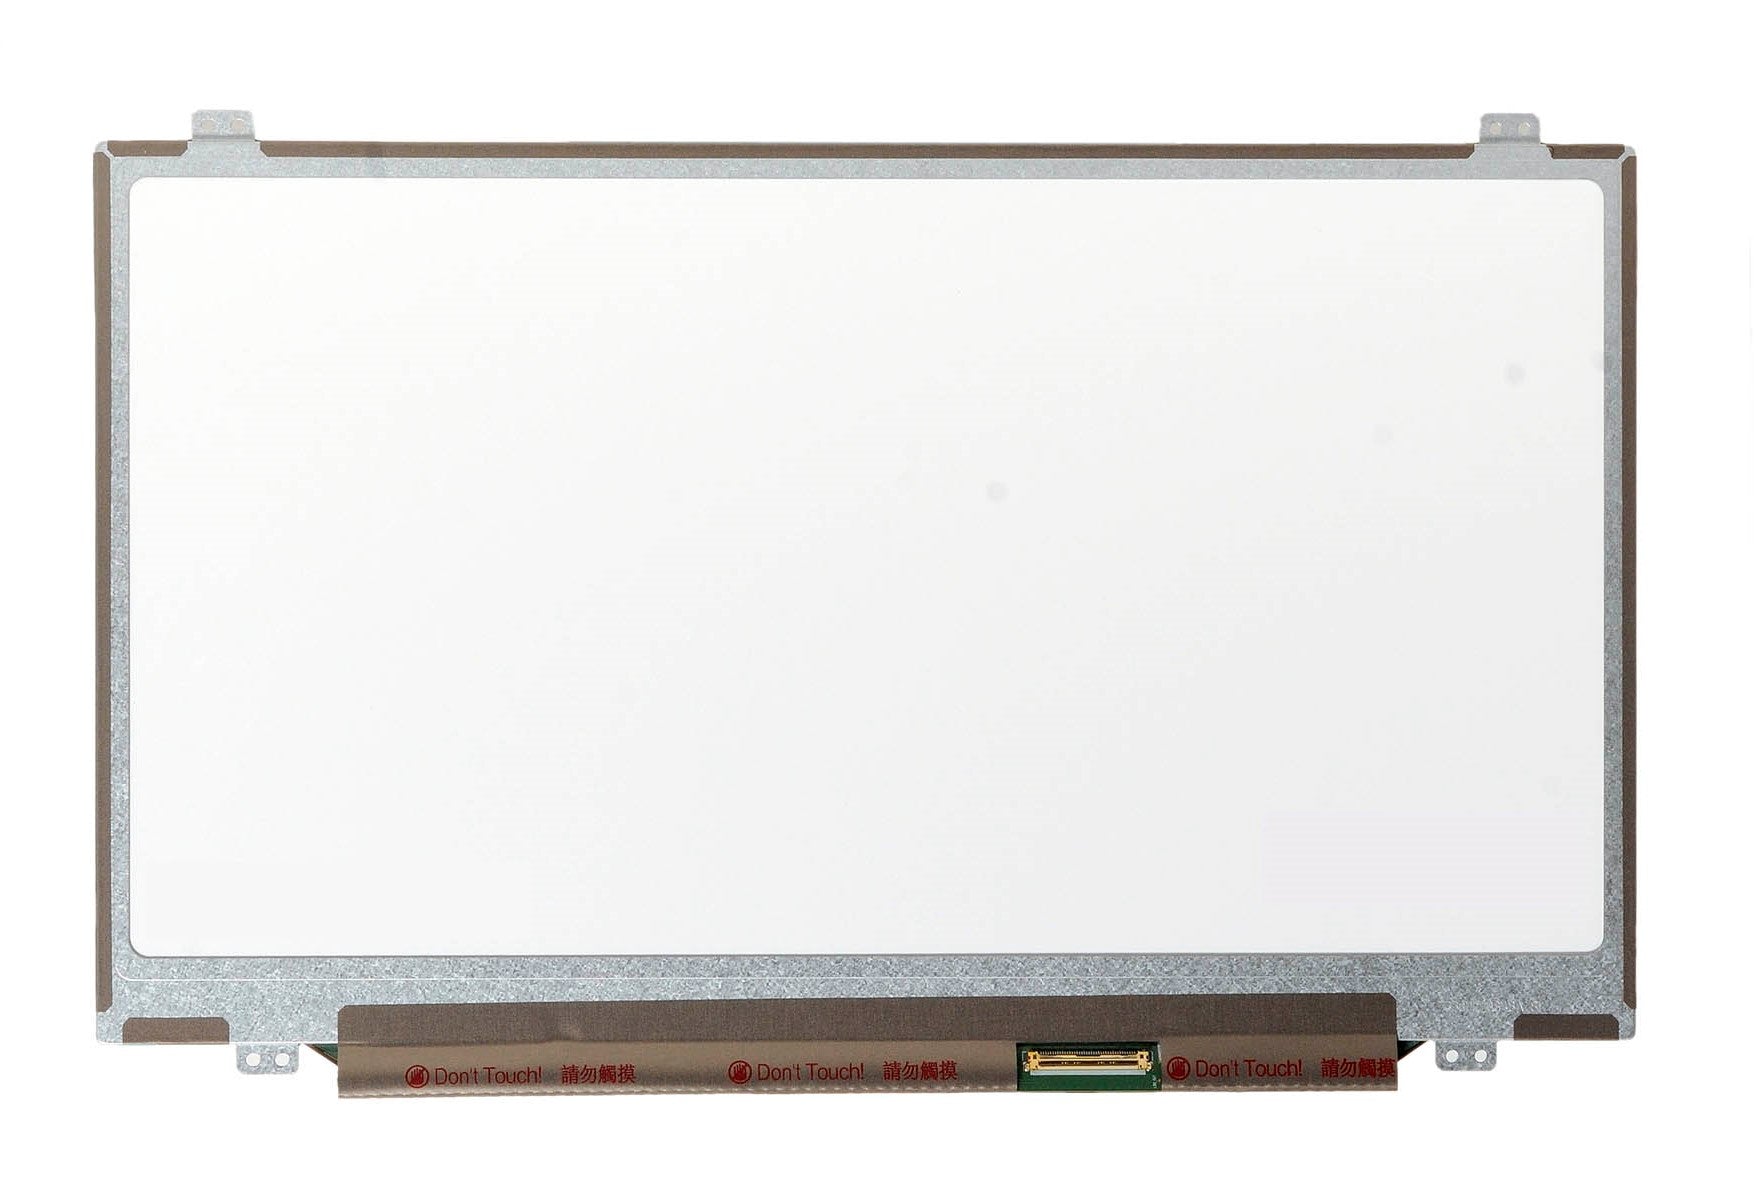 Replacement Screen For Acer Aspire 4830TG HD 1366x768 Glossy LCD LED Display